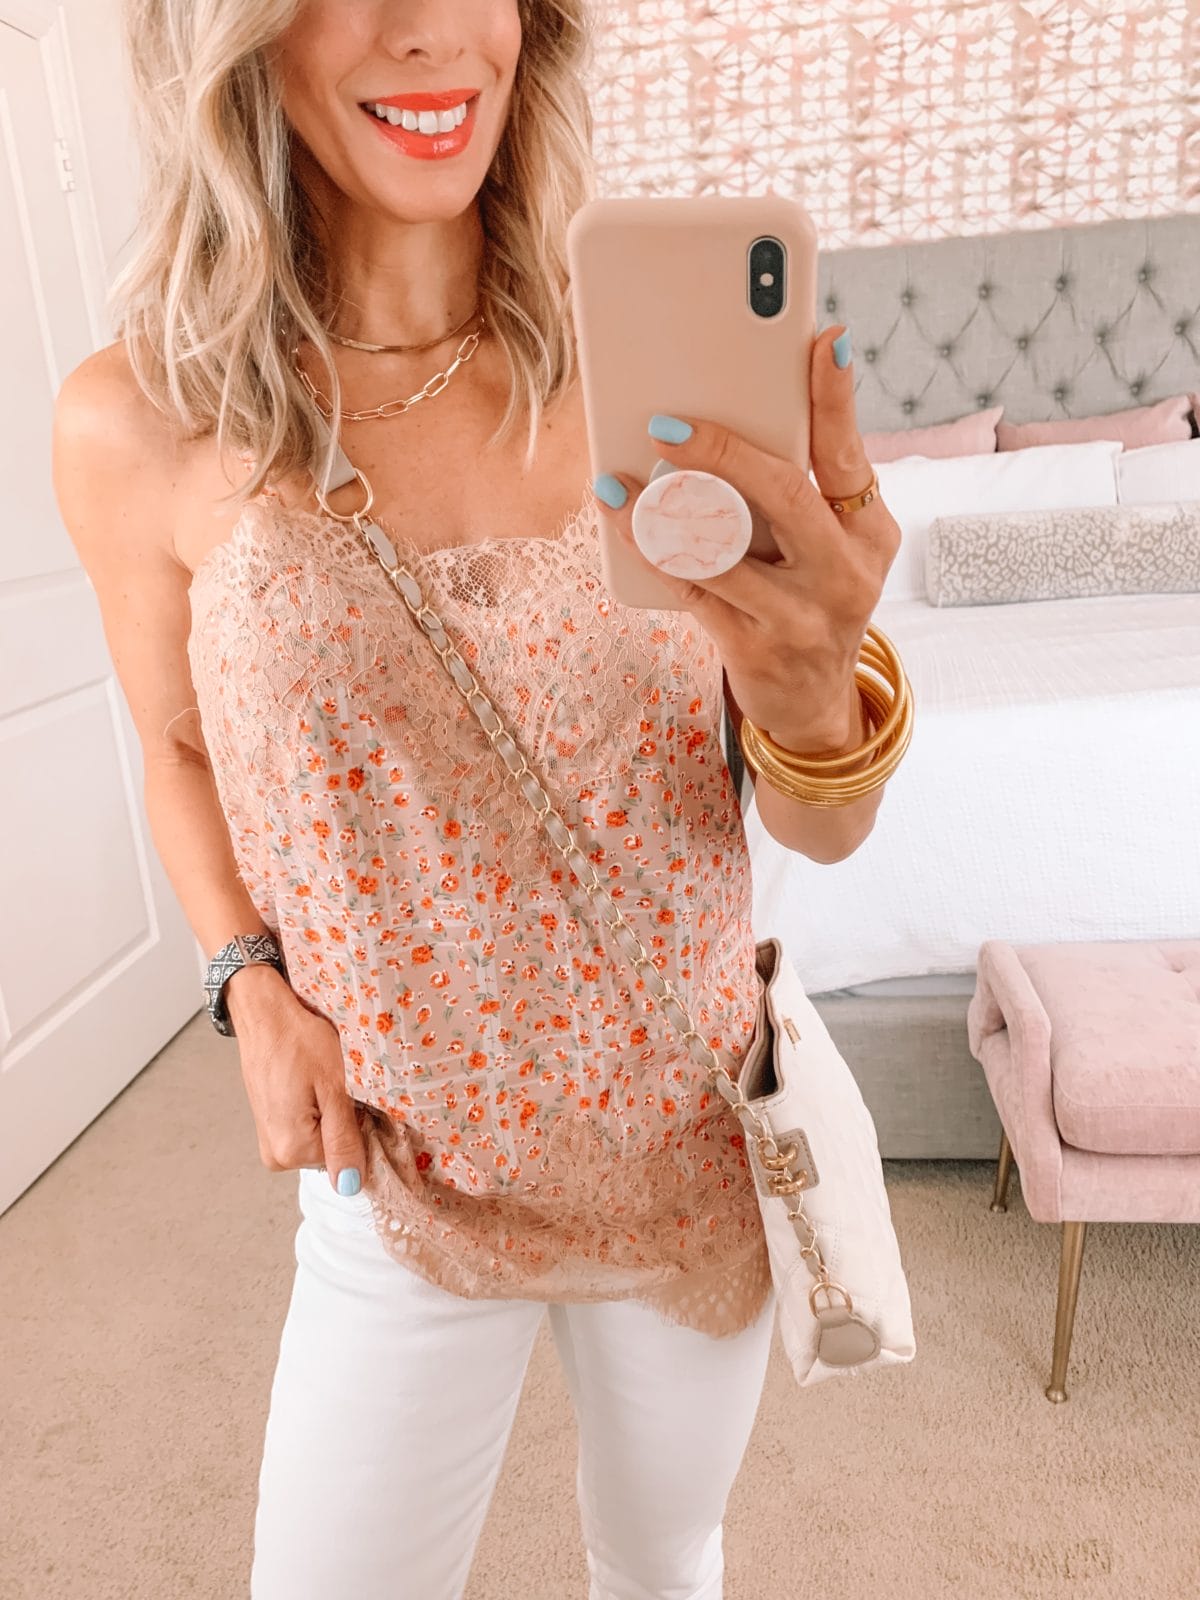 Amazon Fashion Faves, Cami and White Jeans with a White Crossbody and Snakeskin Sandals 